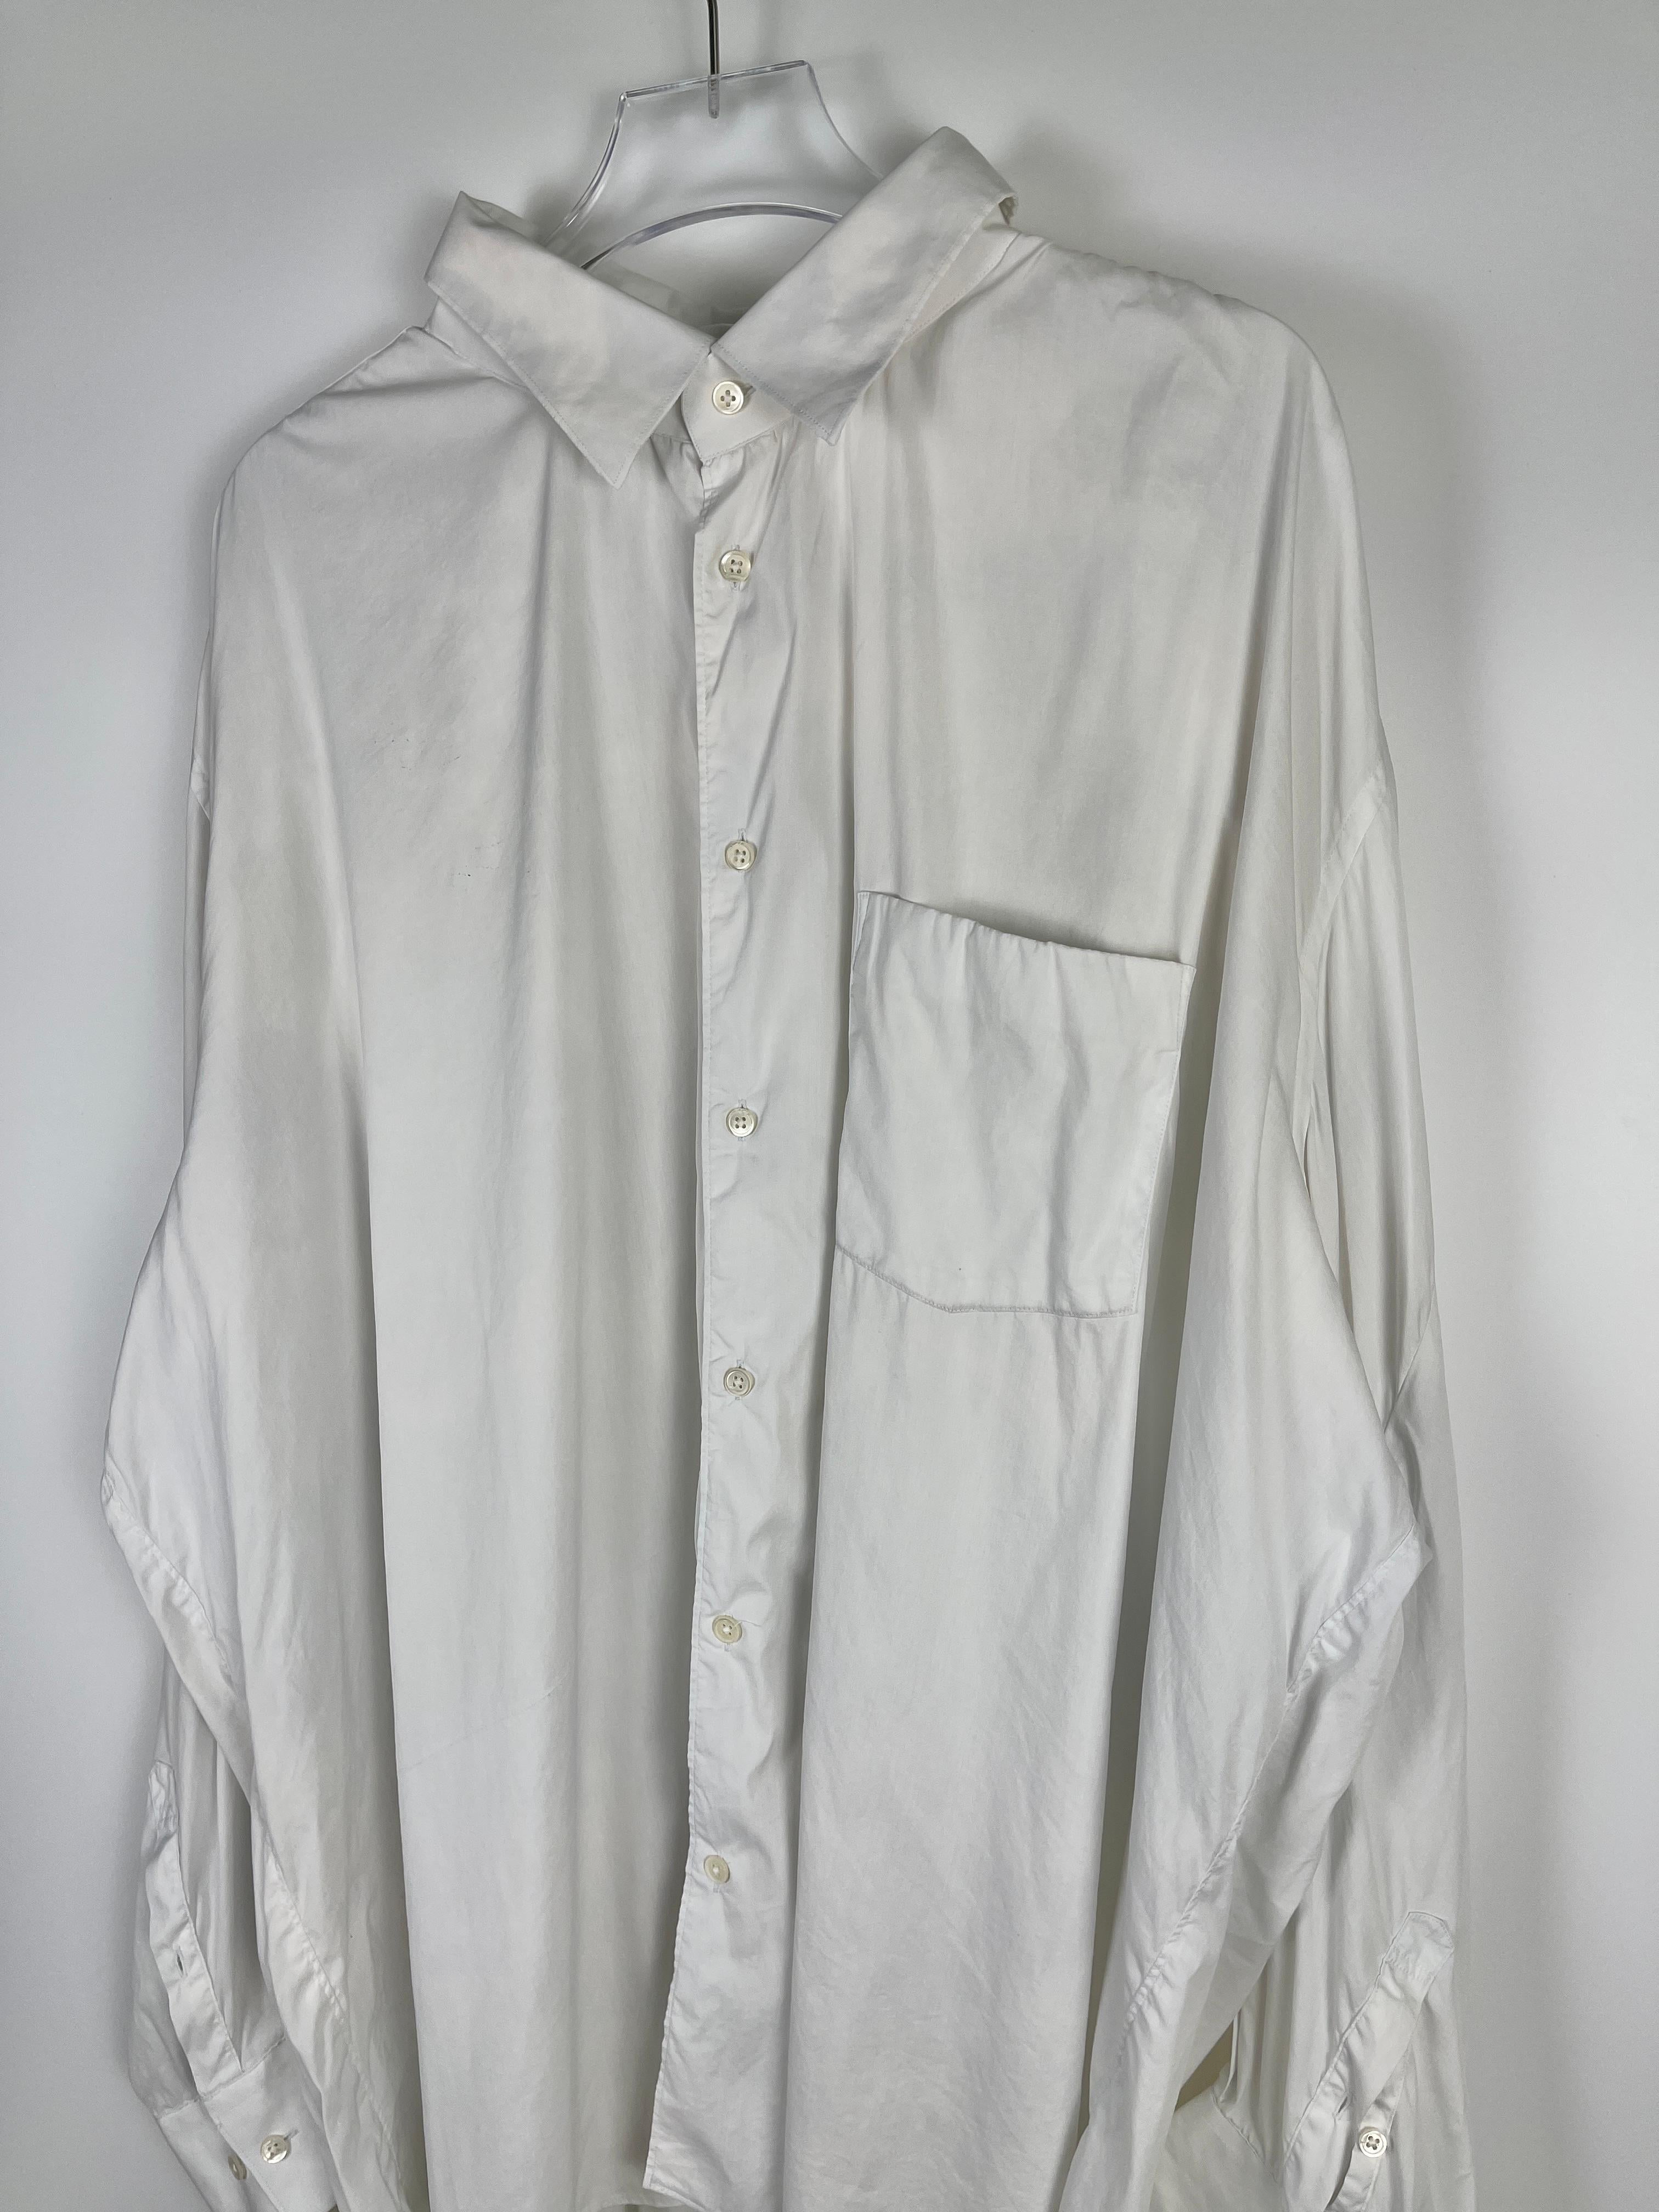 Vetements x Comme des Garcons SHIRT Basic Oversized Shirt In Good Condition For Sale In Seattle, WA